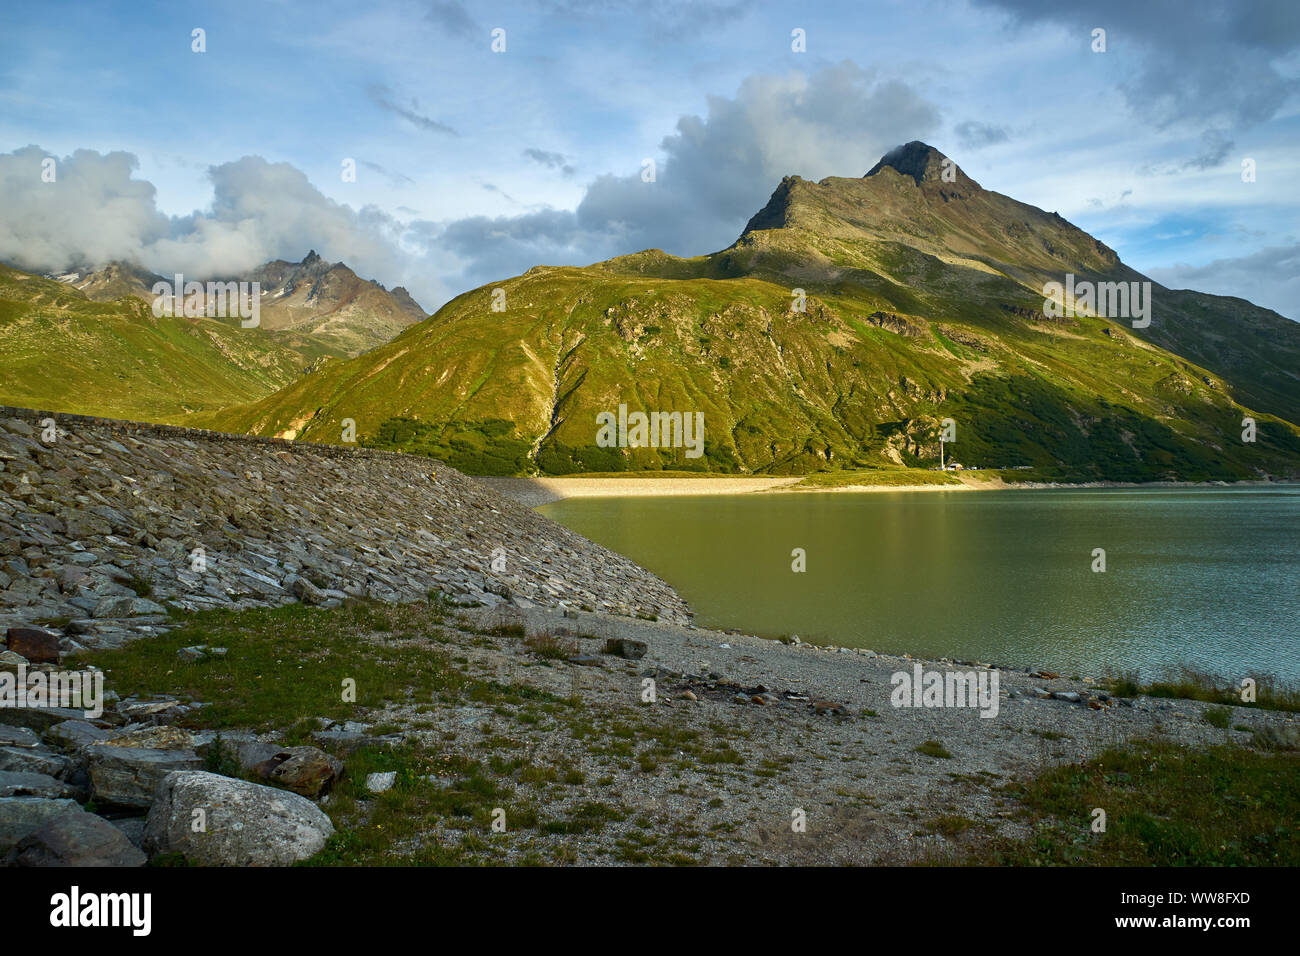 Evening atmosphere over the Silvretta Group in the Central Alps between Switzerland and Austria Stock Photo